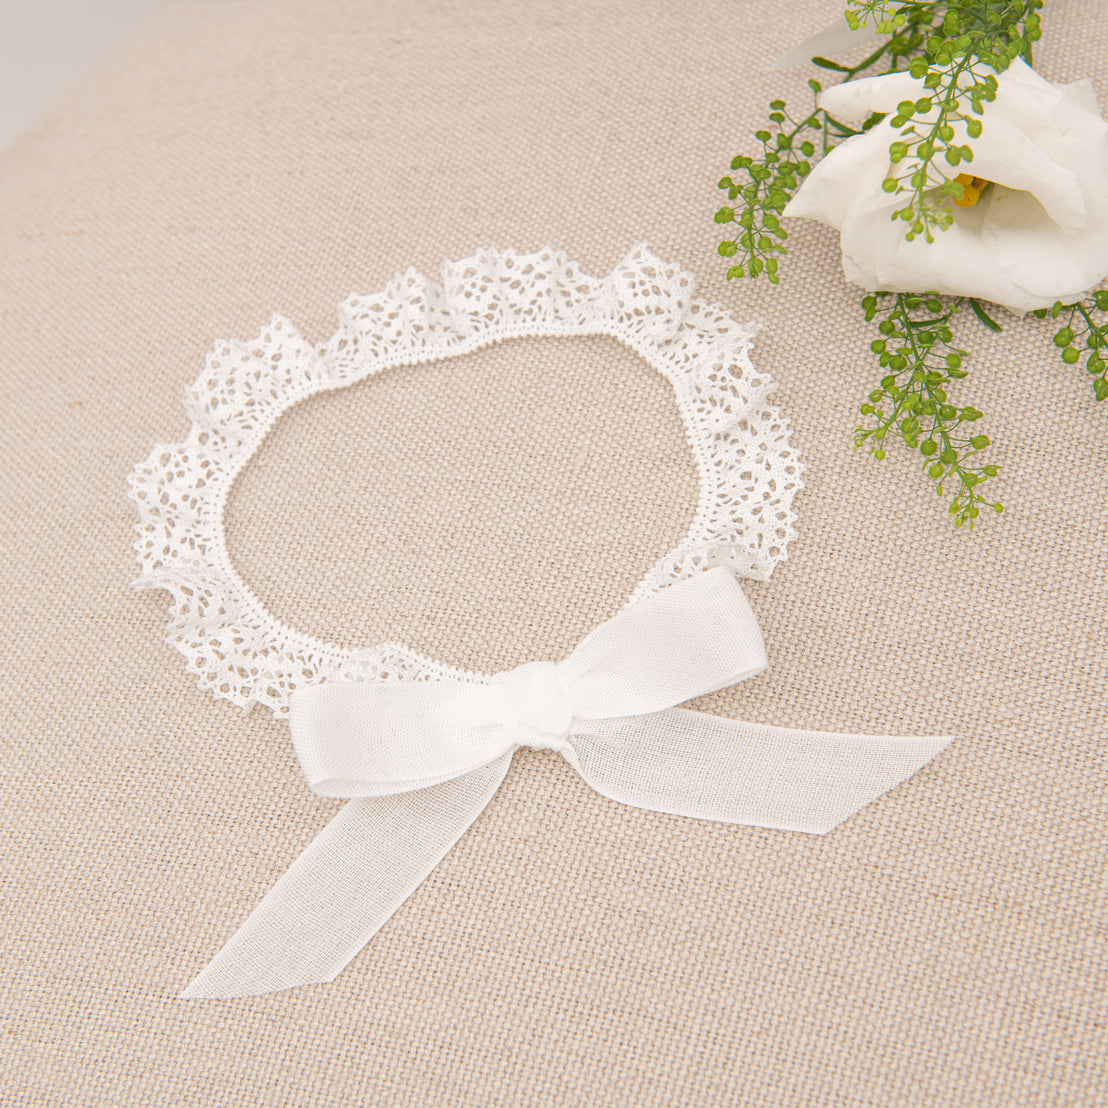 Flat lay photo of a baby girl lace headband - part of our Poppy collection of upscale baby clothes.